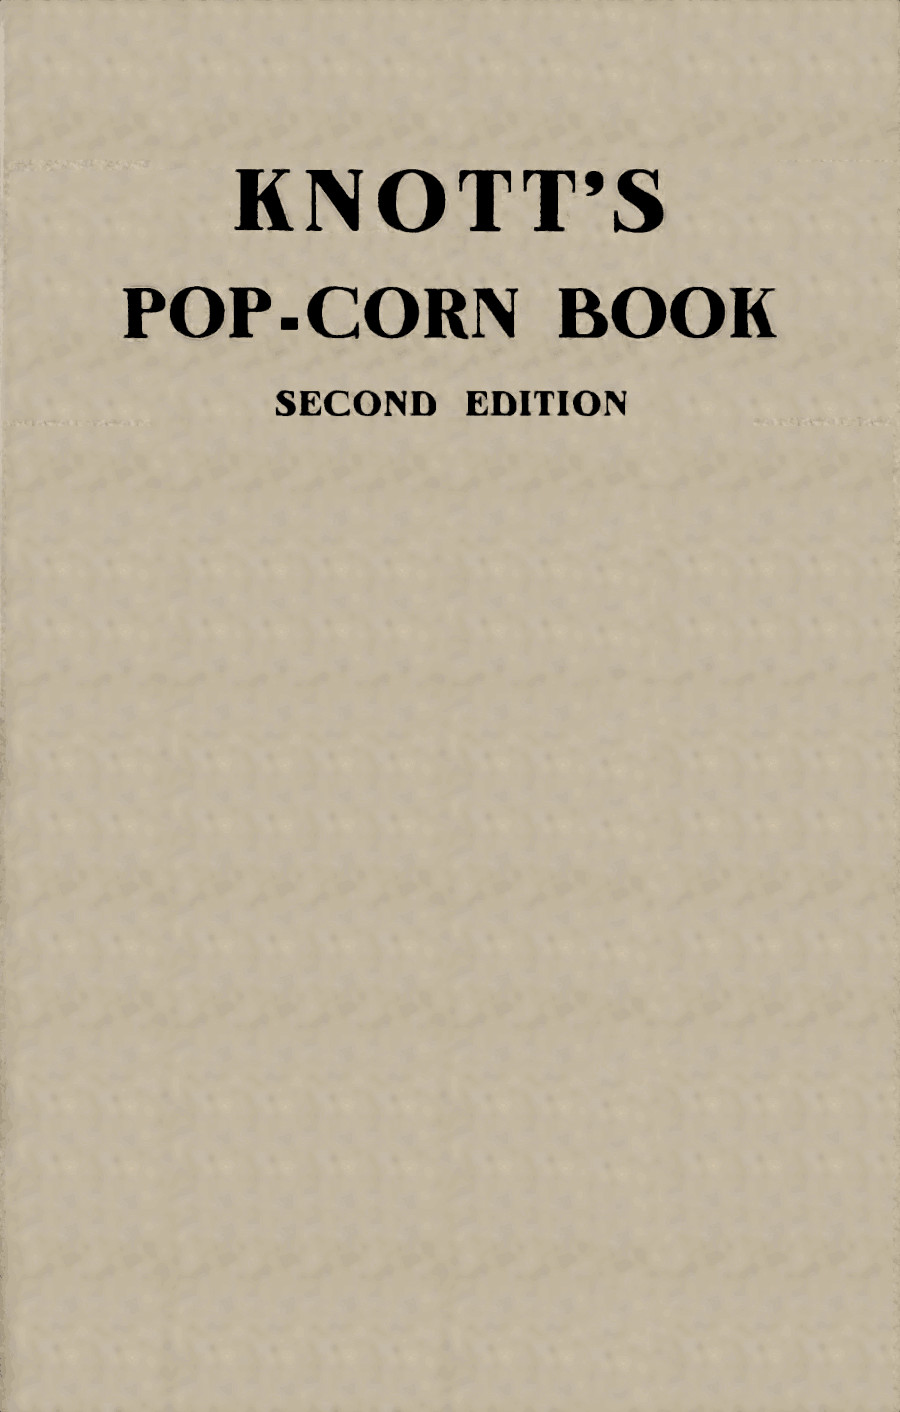 Knott's pop-corn book&#10;Dedicated to the health the happiness the wealth of all people